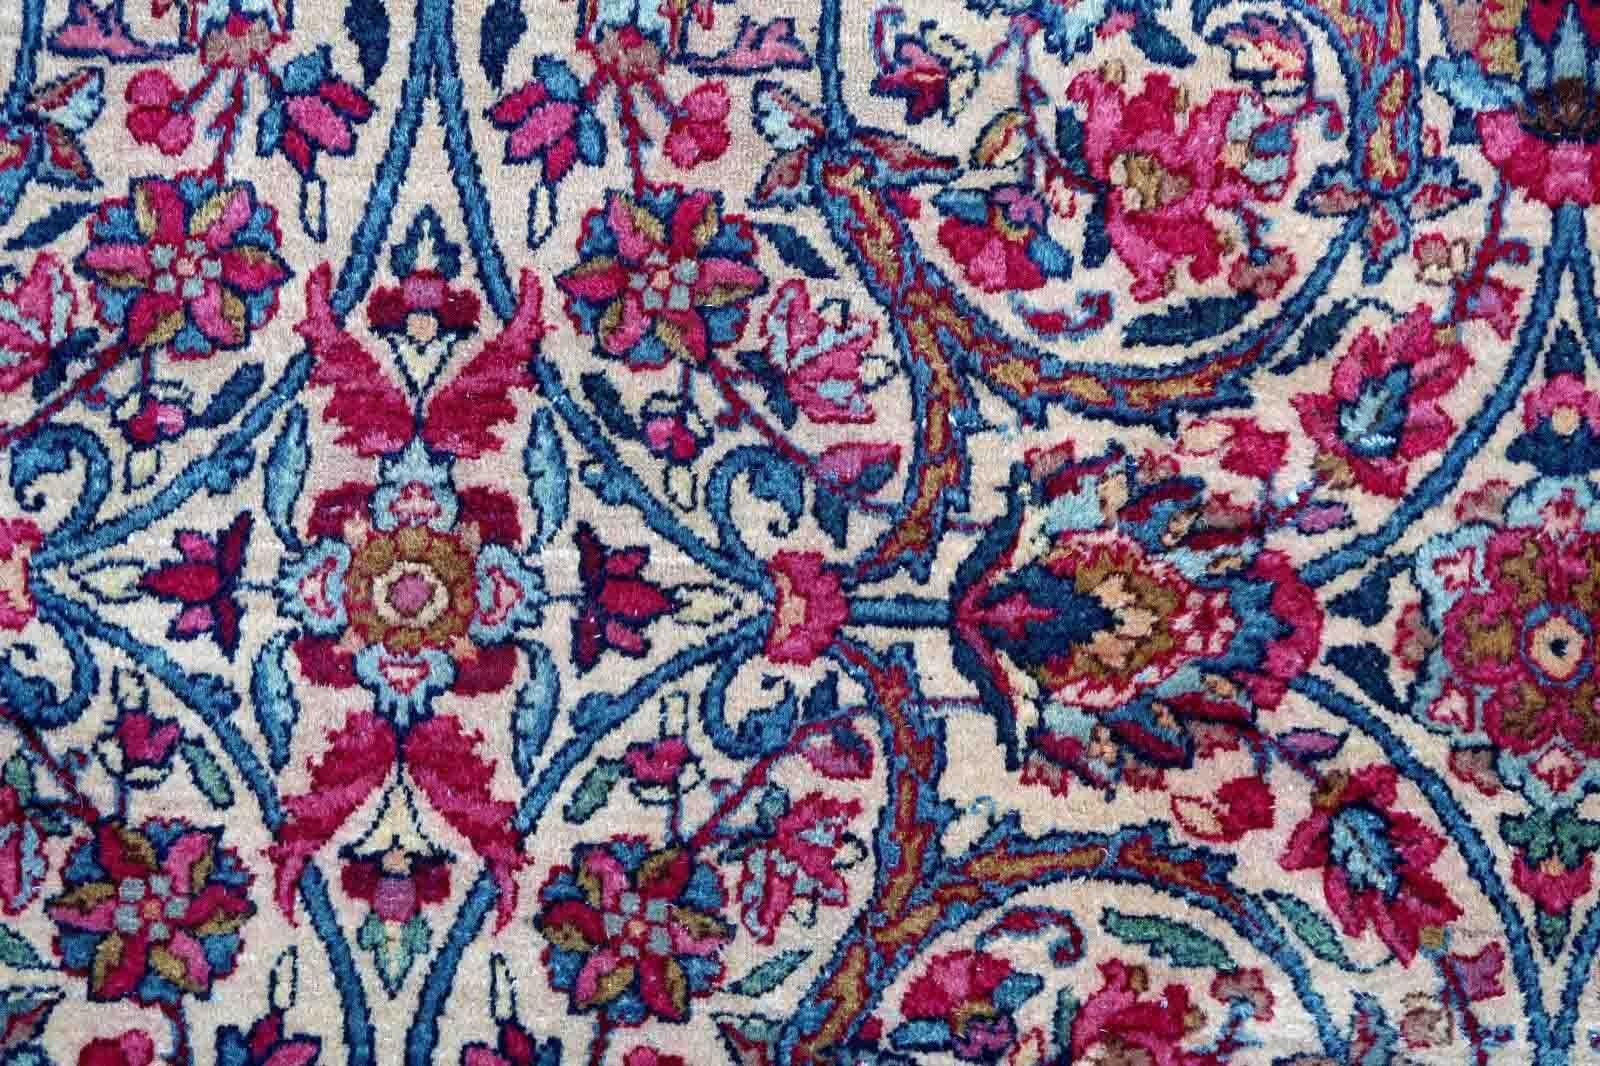 Handmade antique fragment of Kerman rug in traditional busy floral design. The fragment is in original good condition, it is from the beginning of 20t century.

-condition: original good,

-circa: 1930s,

-size: 2.9' x 8.6' (90cm x